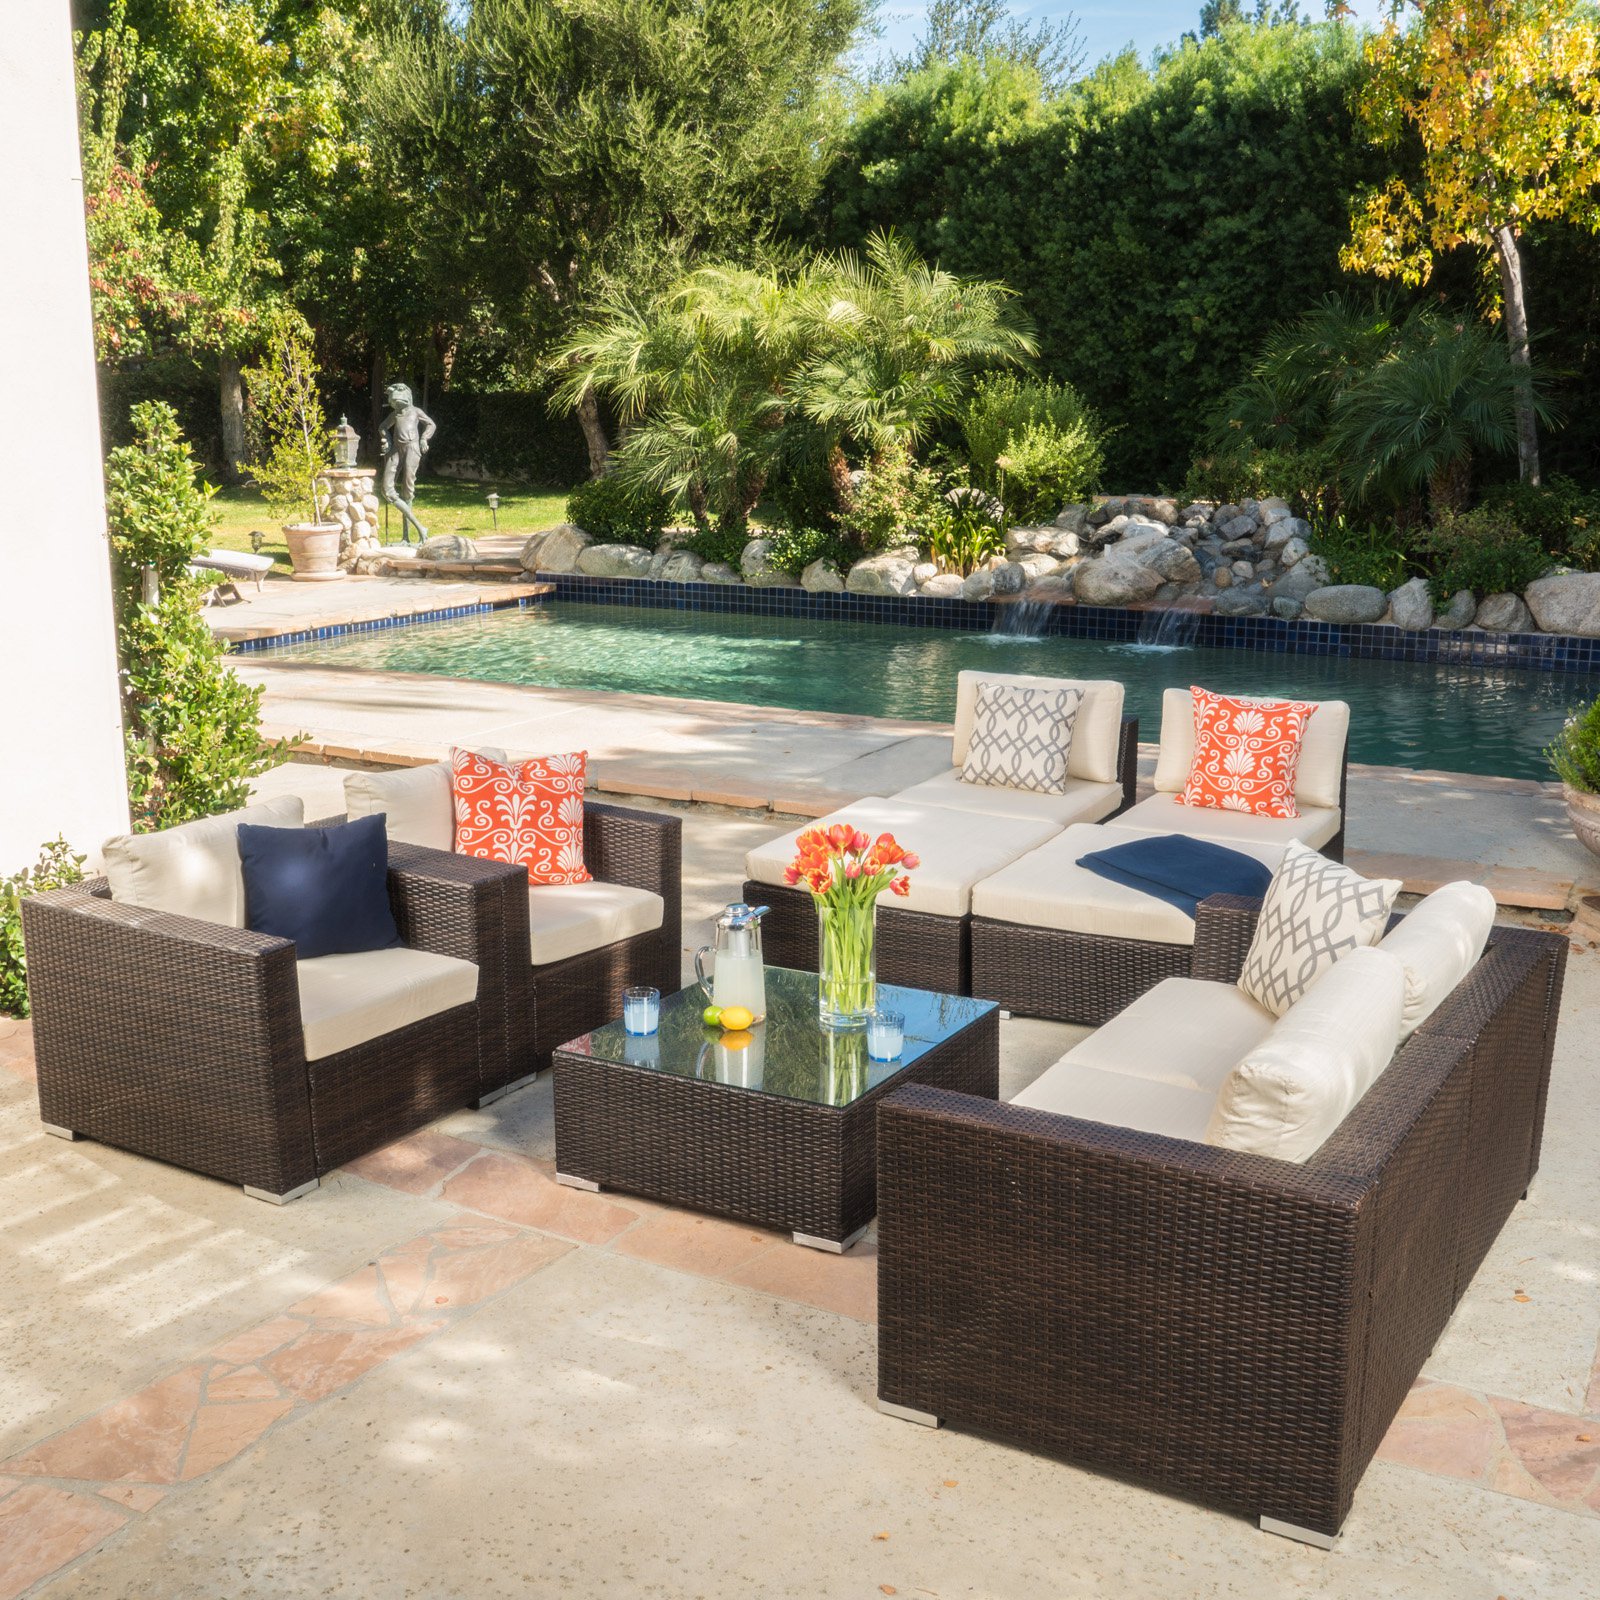 Francisco 9pc Outdoor Wicker Sectional Sofa Set with Cushions - image 1 of 9